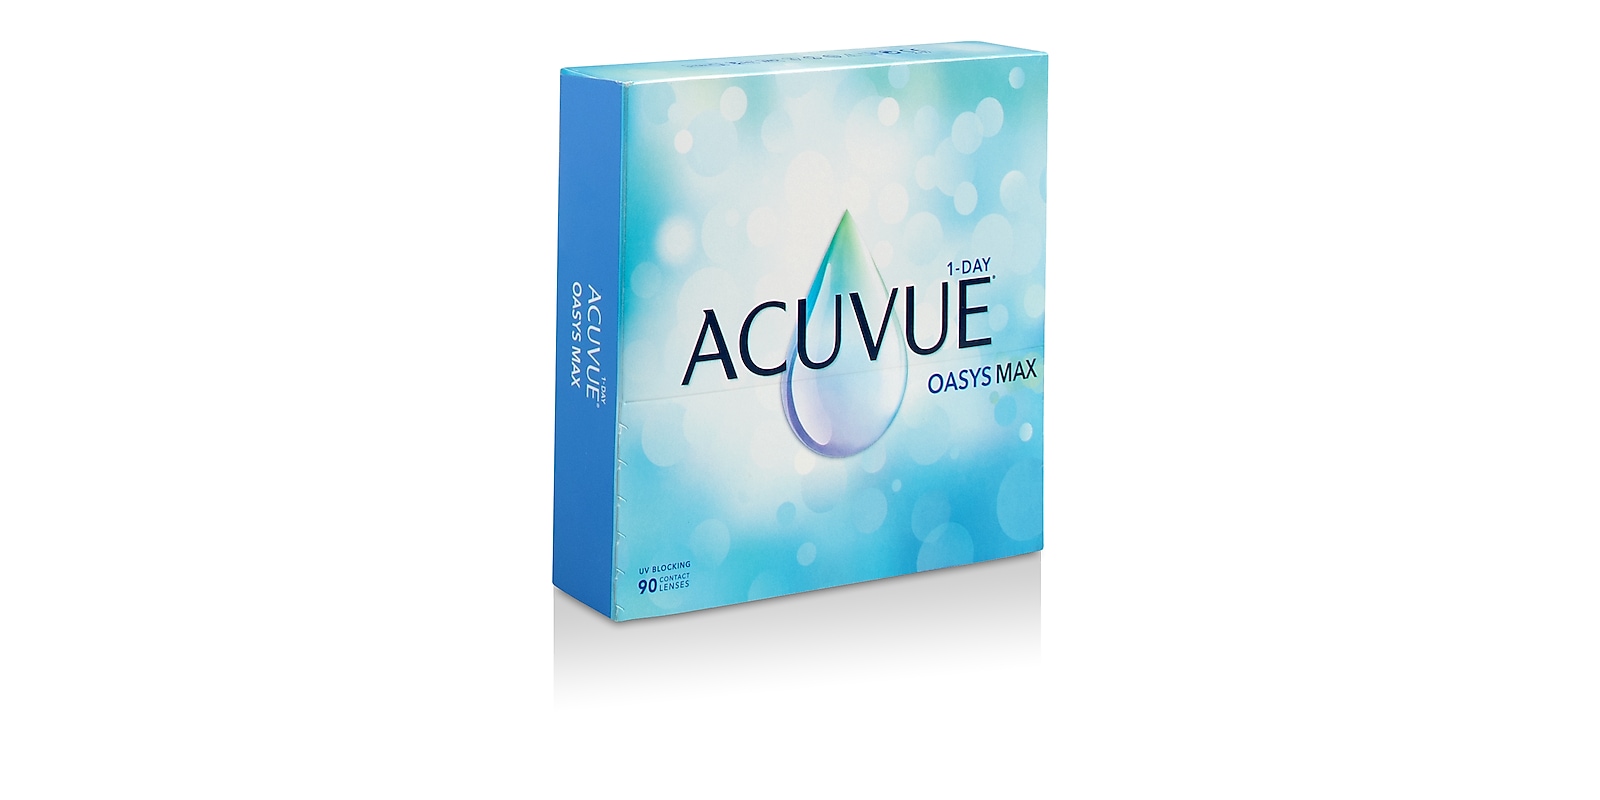 Johnson & Jhonson - Acuvue® Oasys Max 1-day, 90 Pack